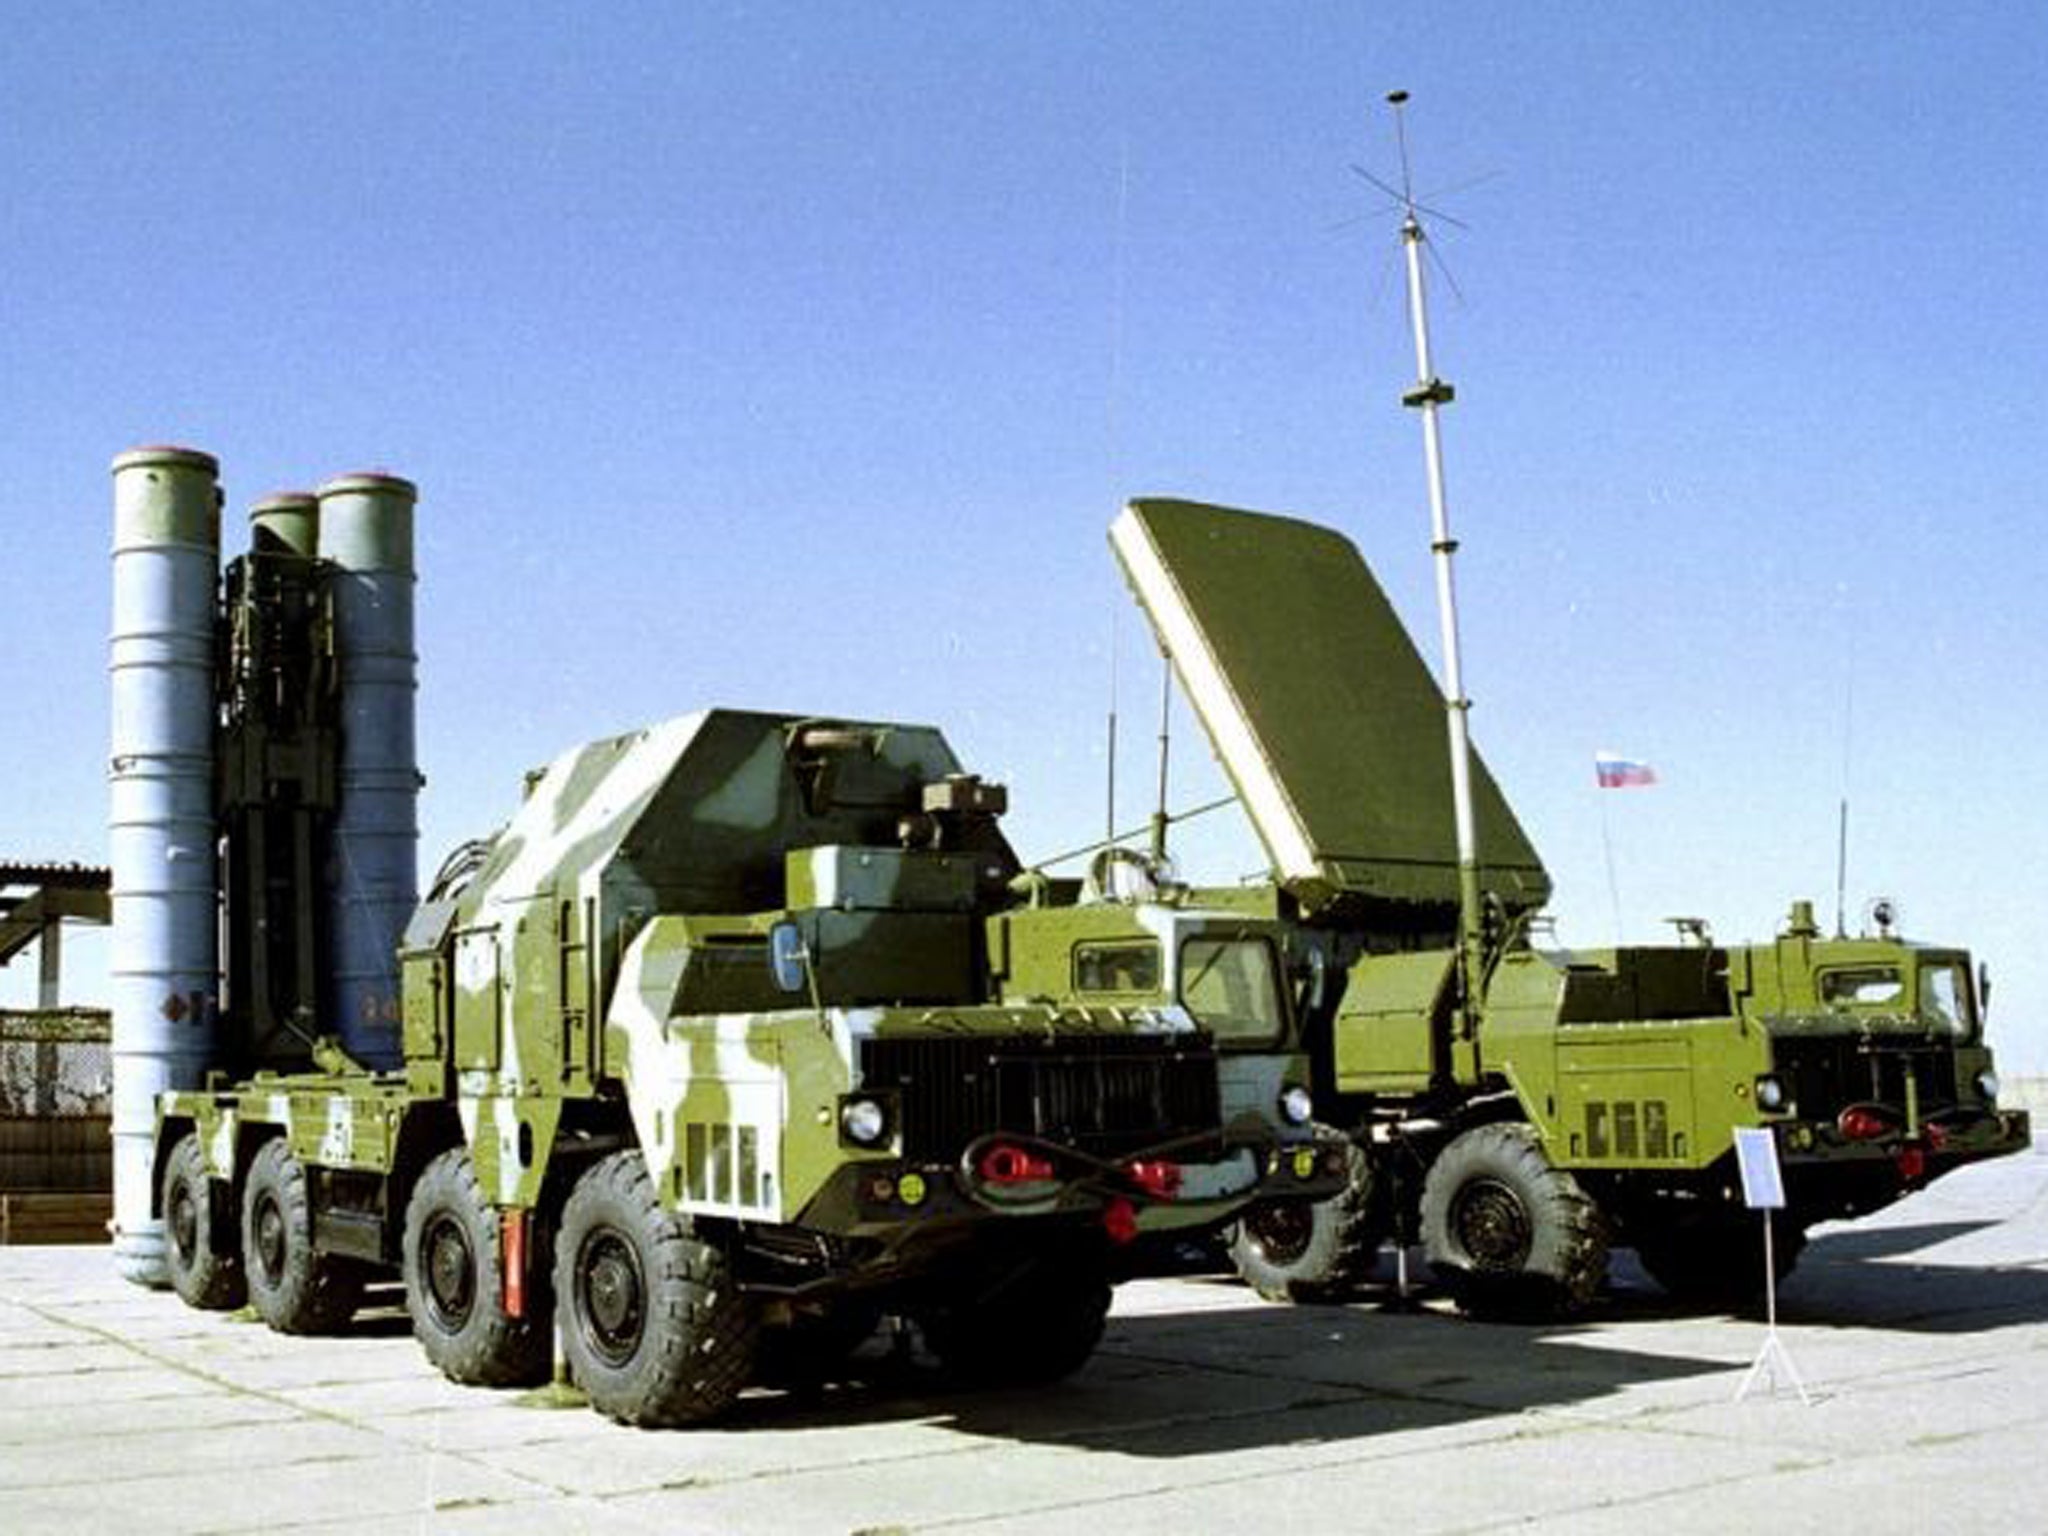 The S-300s have a range of up to 125 miles and can track and strike multiple targets simultaneously